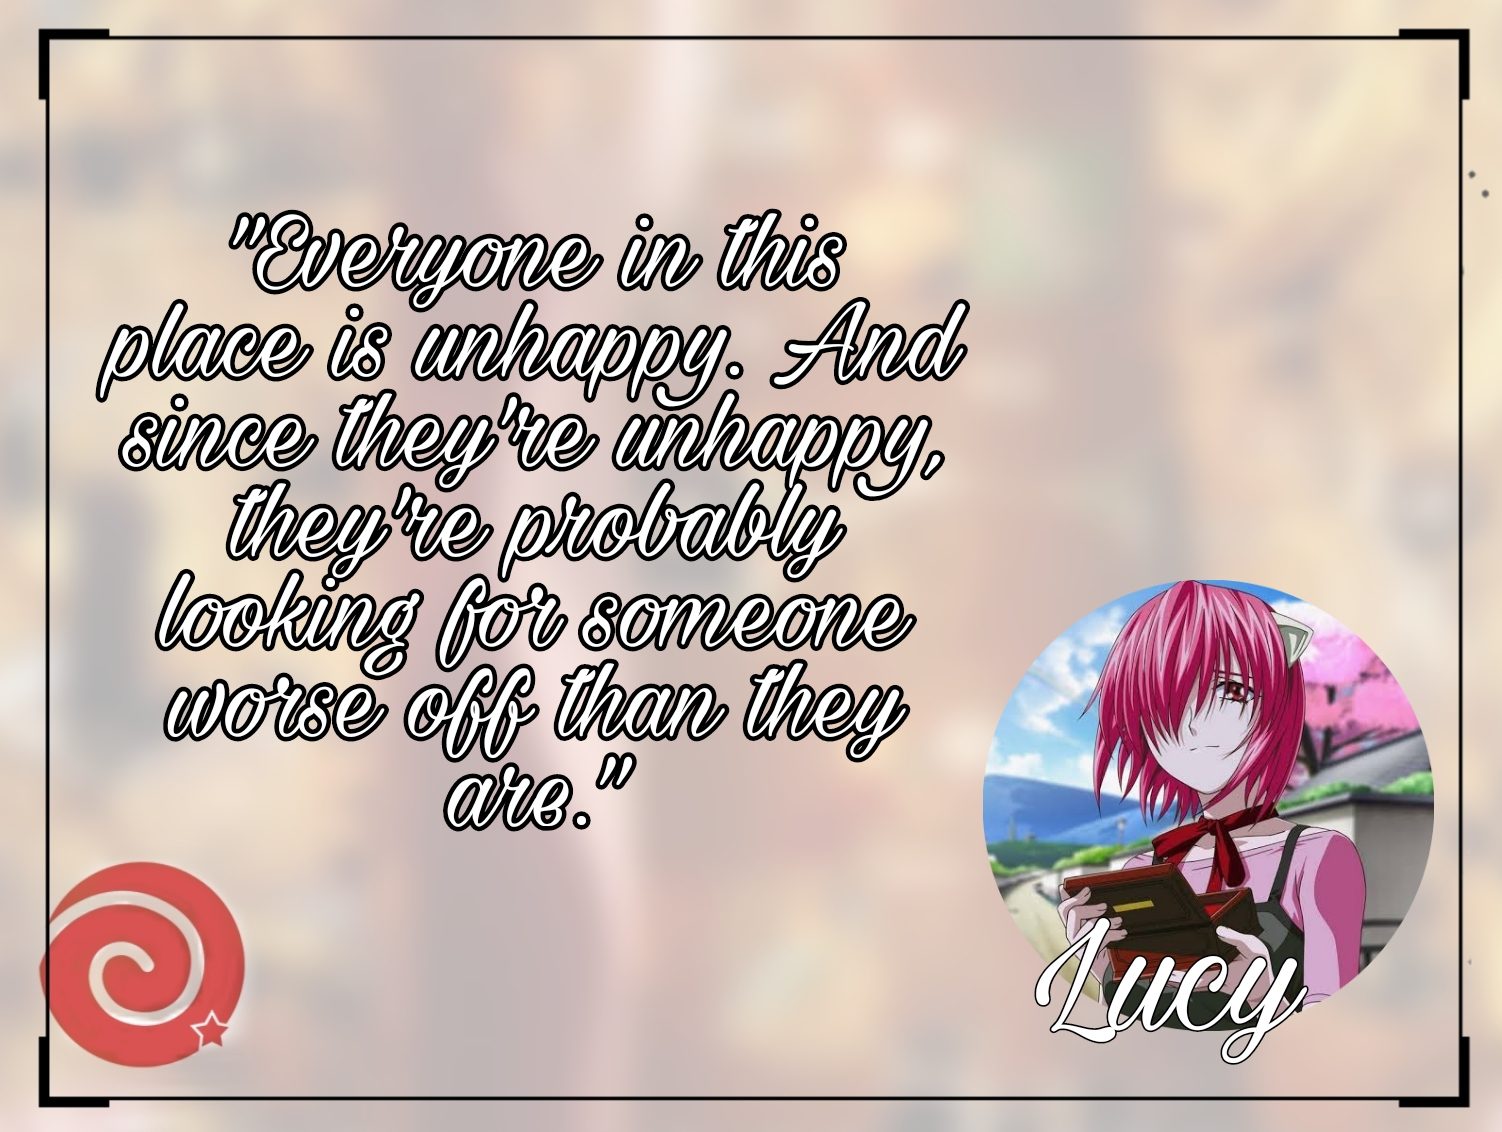 Quotes from Elfen Lied